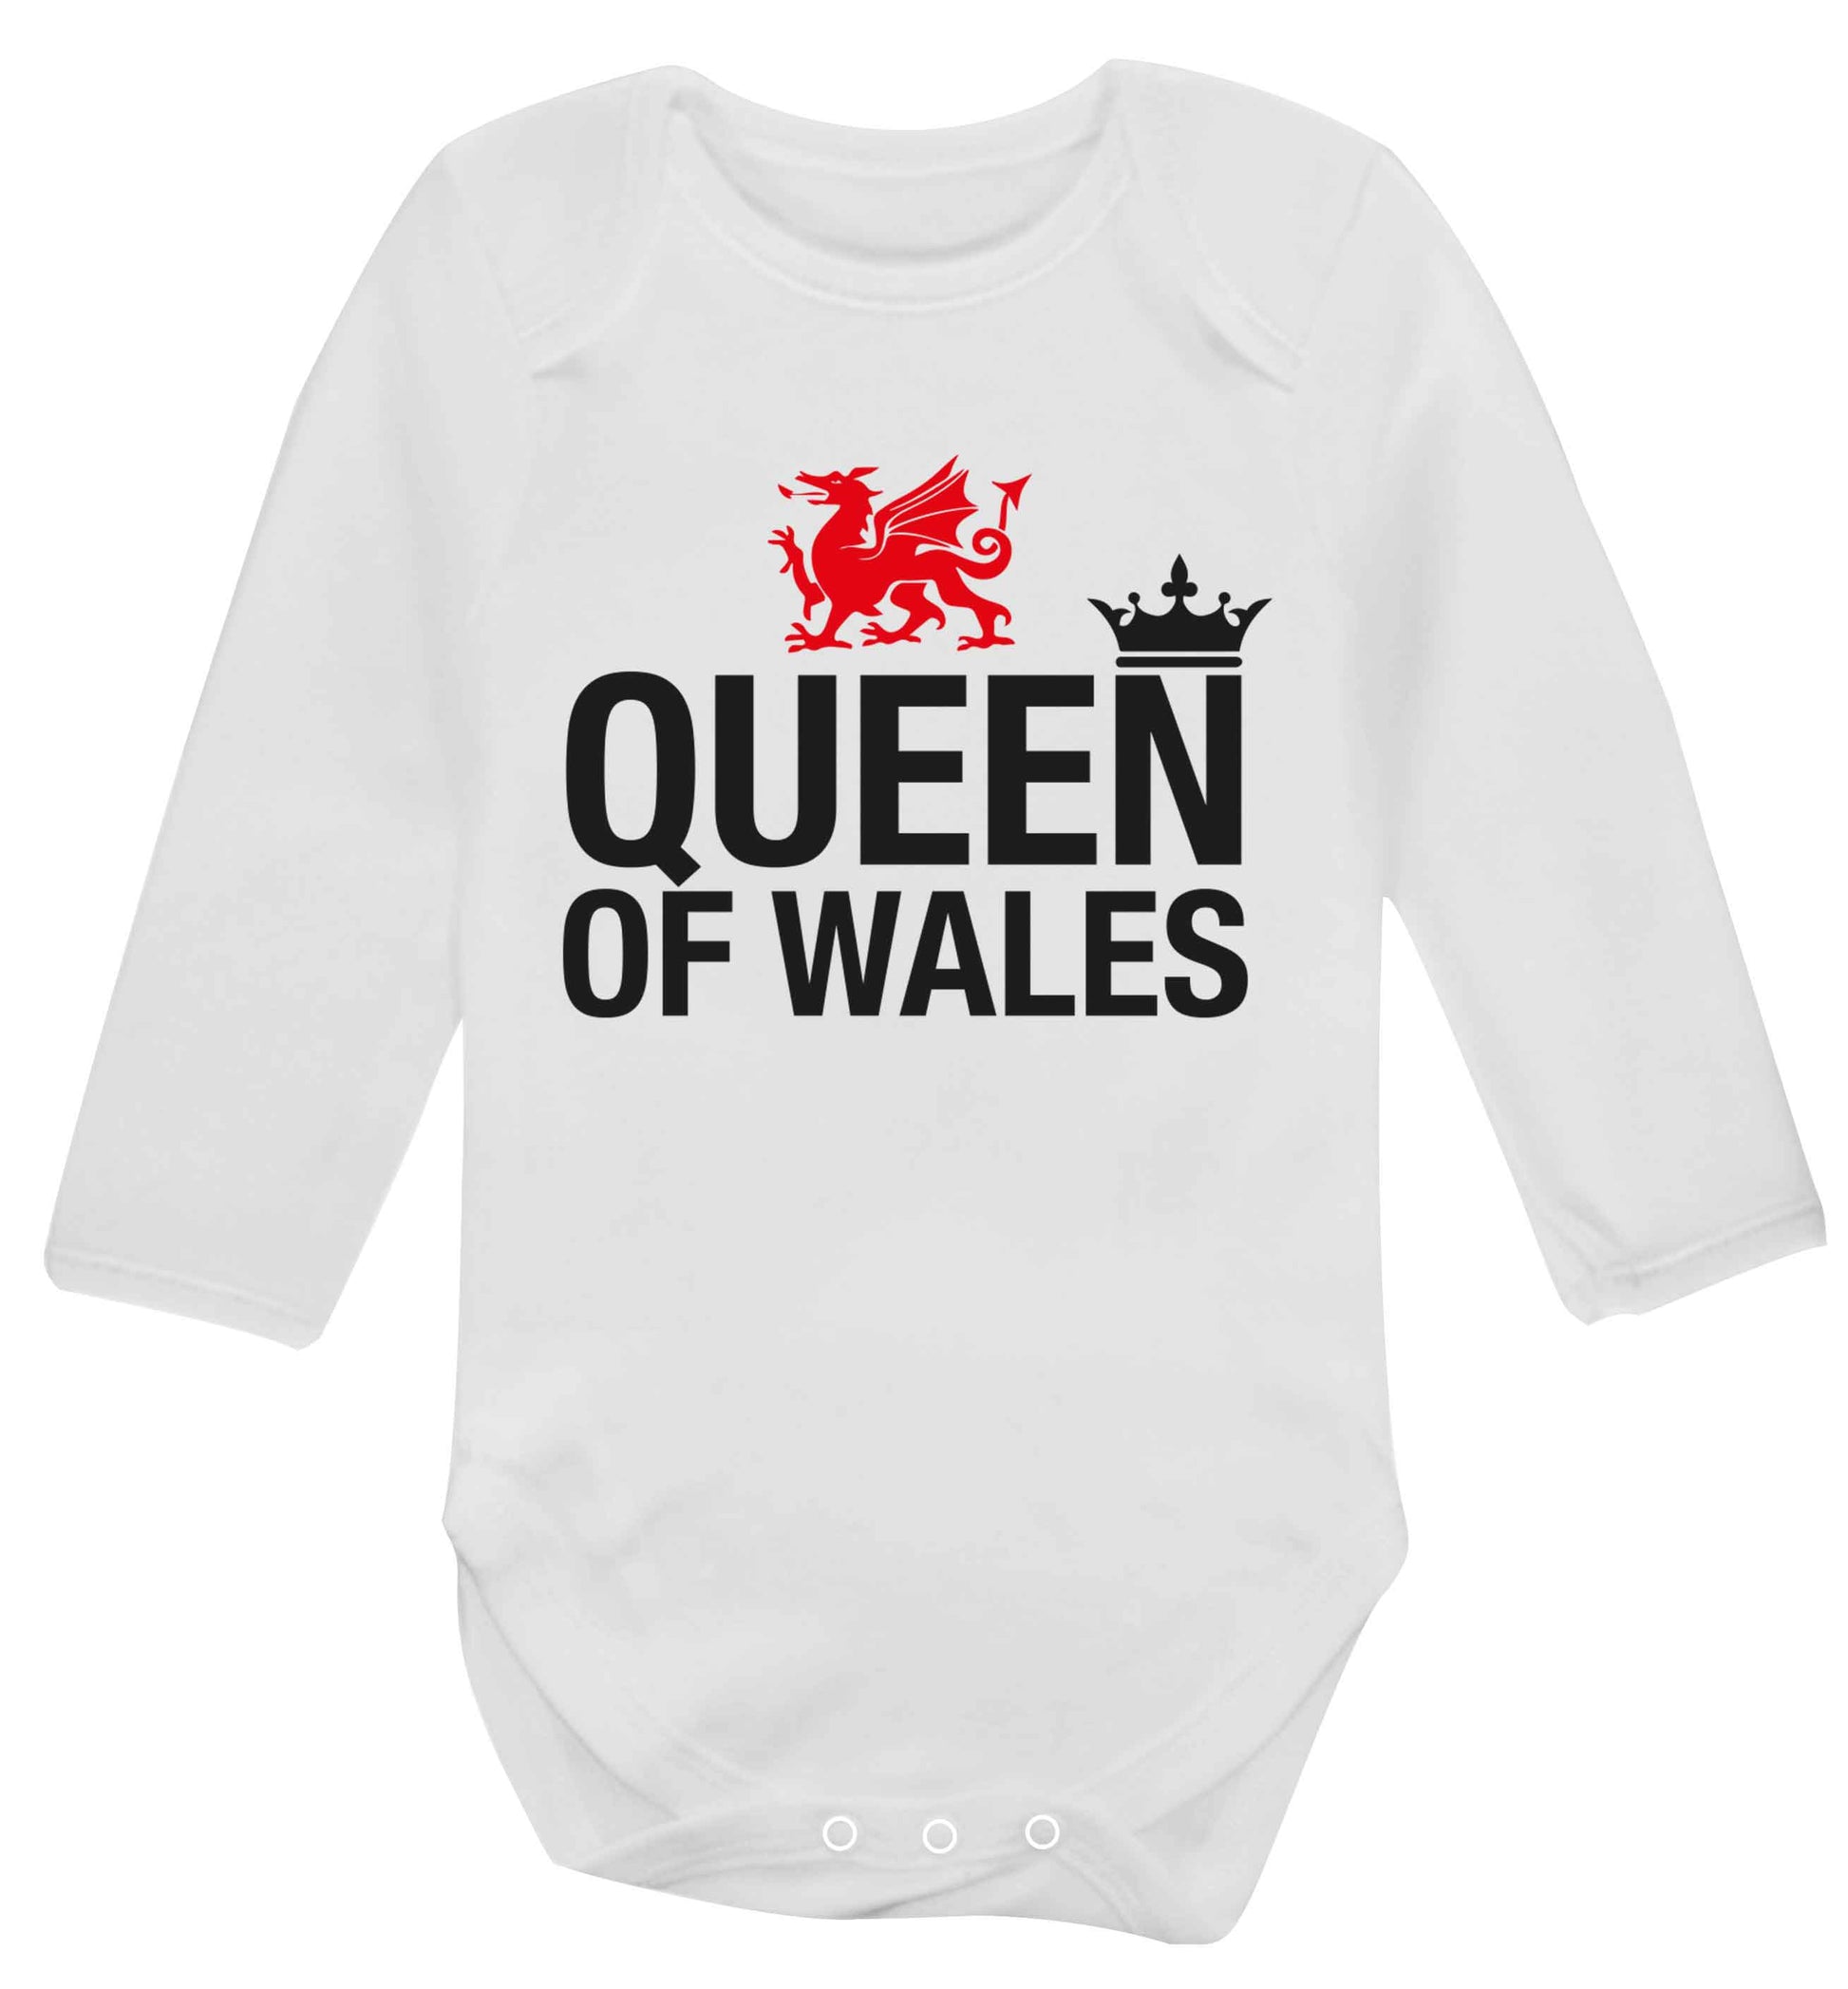 Queen of Wales Baby Vest long sleeved white 6-12 months